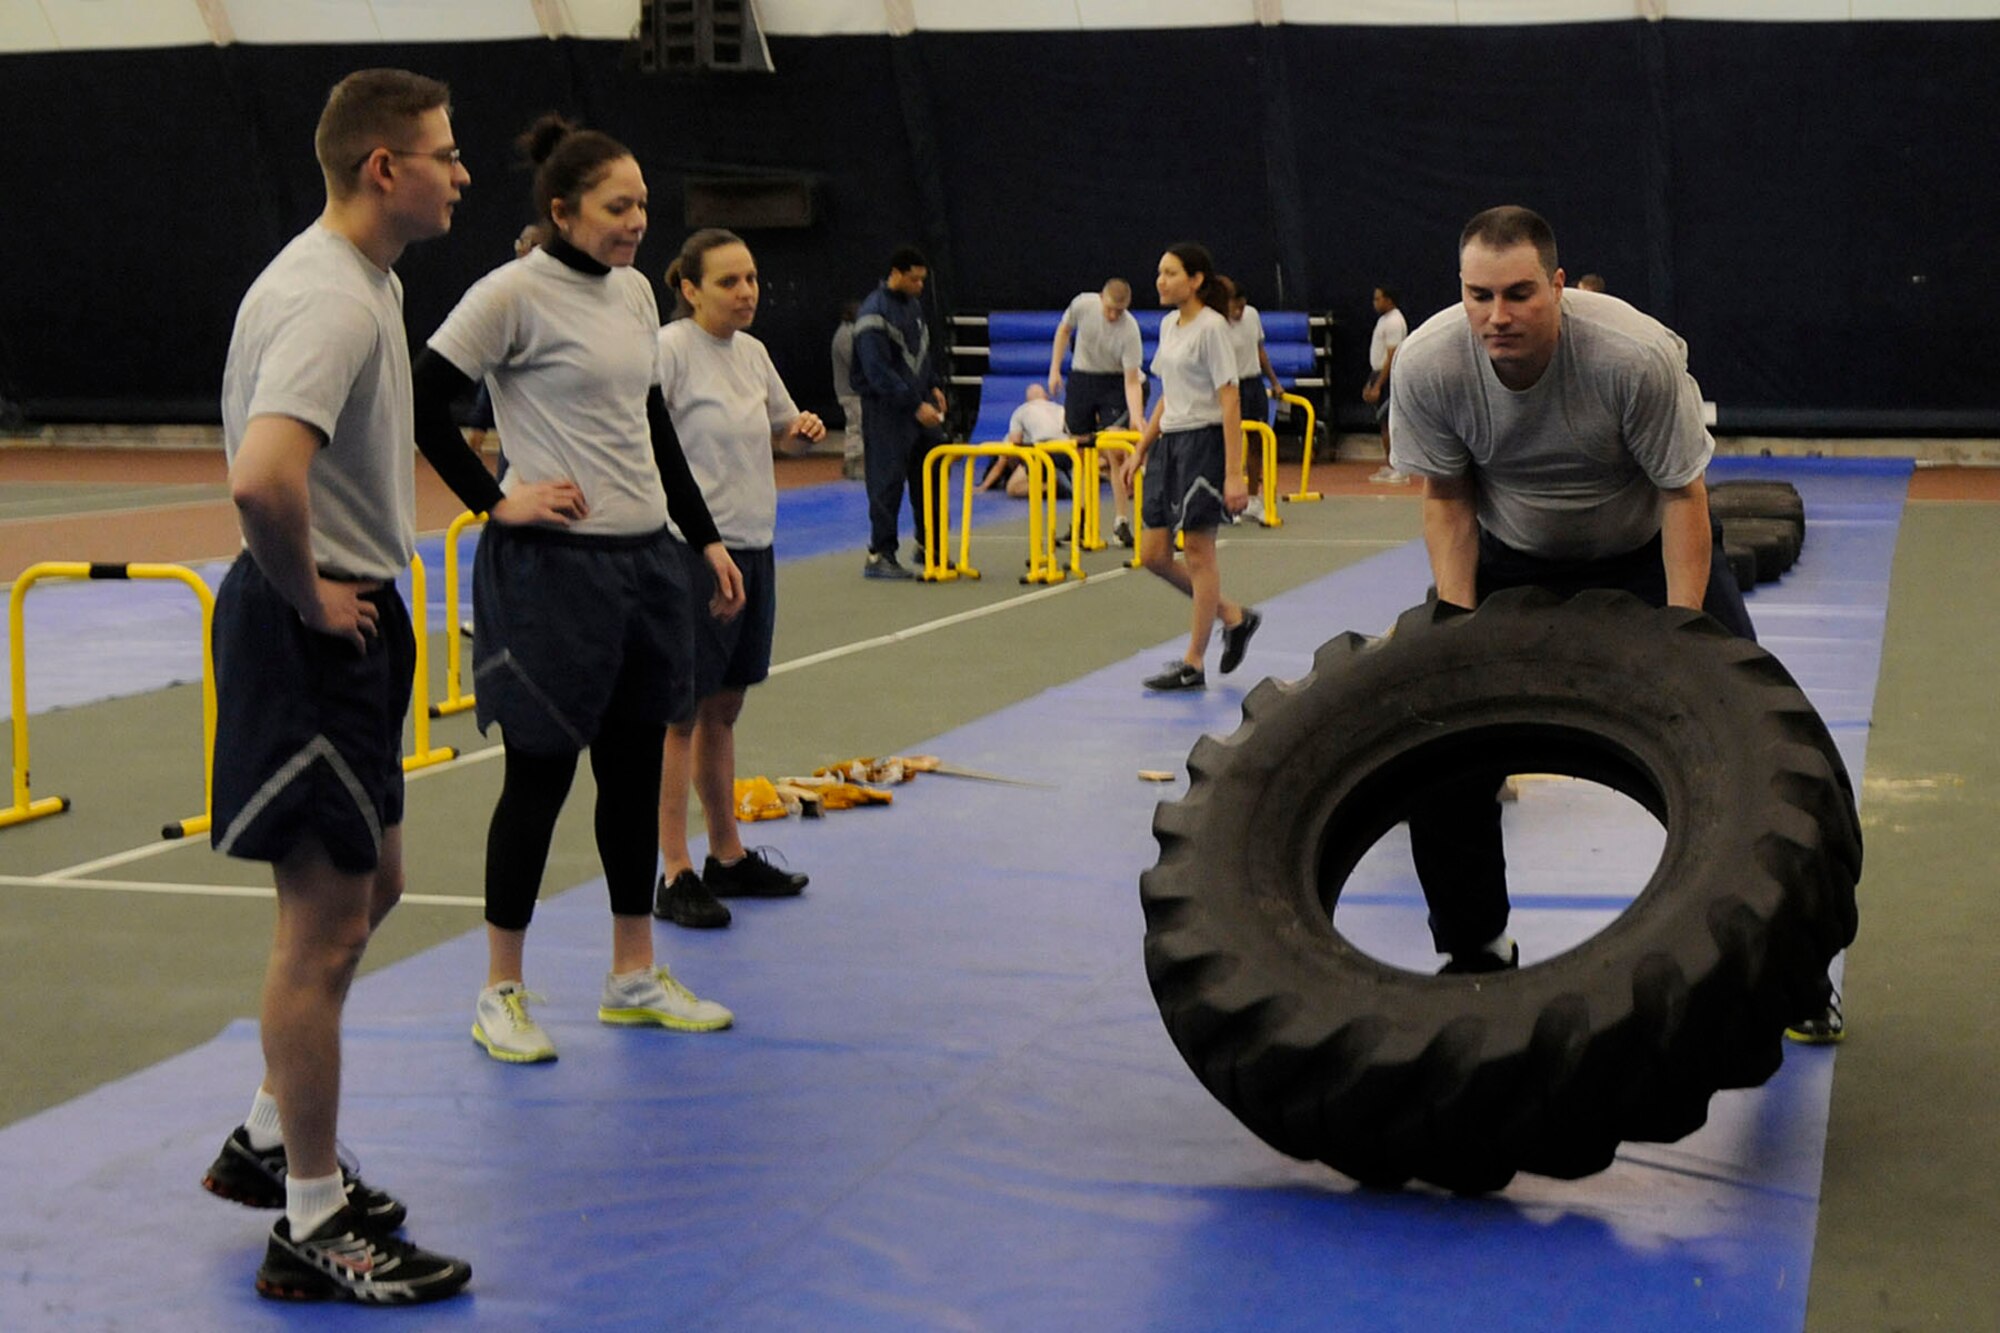 HANSCOM AIR FORCE BASE, Mass. -- Staff Sgt. Kyle Hoffman, 66th Comptroller Squadron accounting technician, moves a tire as other members of the 66th Air Base Group participate in the group's monthly Warrior Day morning workout in the Tennis Bubble Feb. 6. This month, eight teams participated in nine obstacles over the course of about 45 minutes. (U.S. Air Force photo by Linda LaBonte Britt)